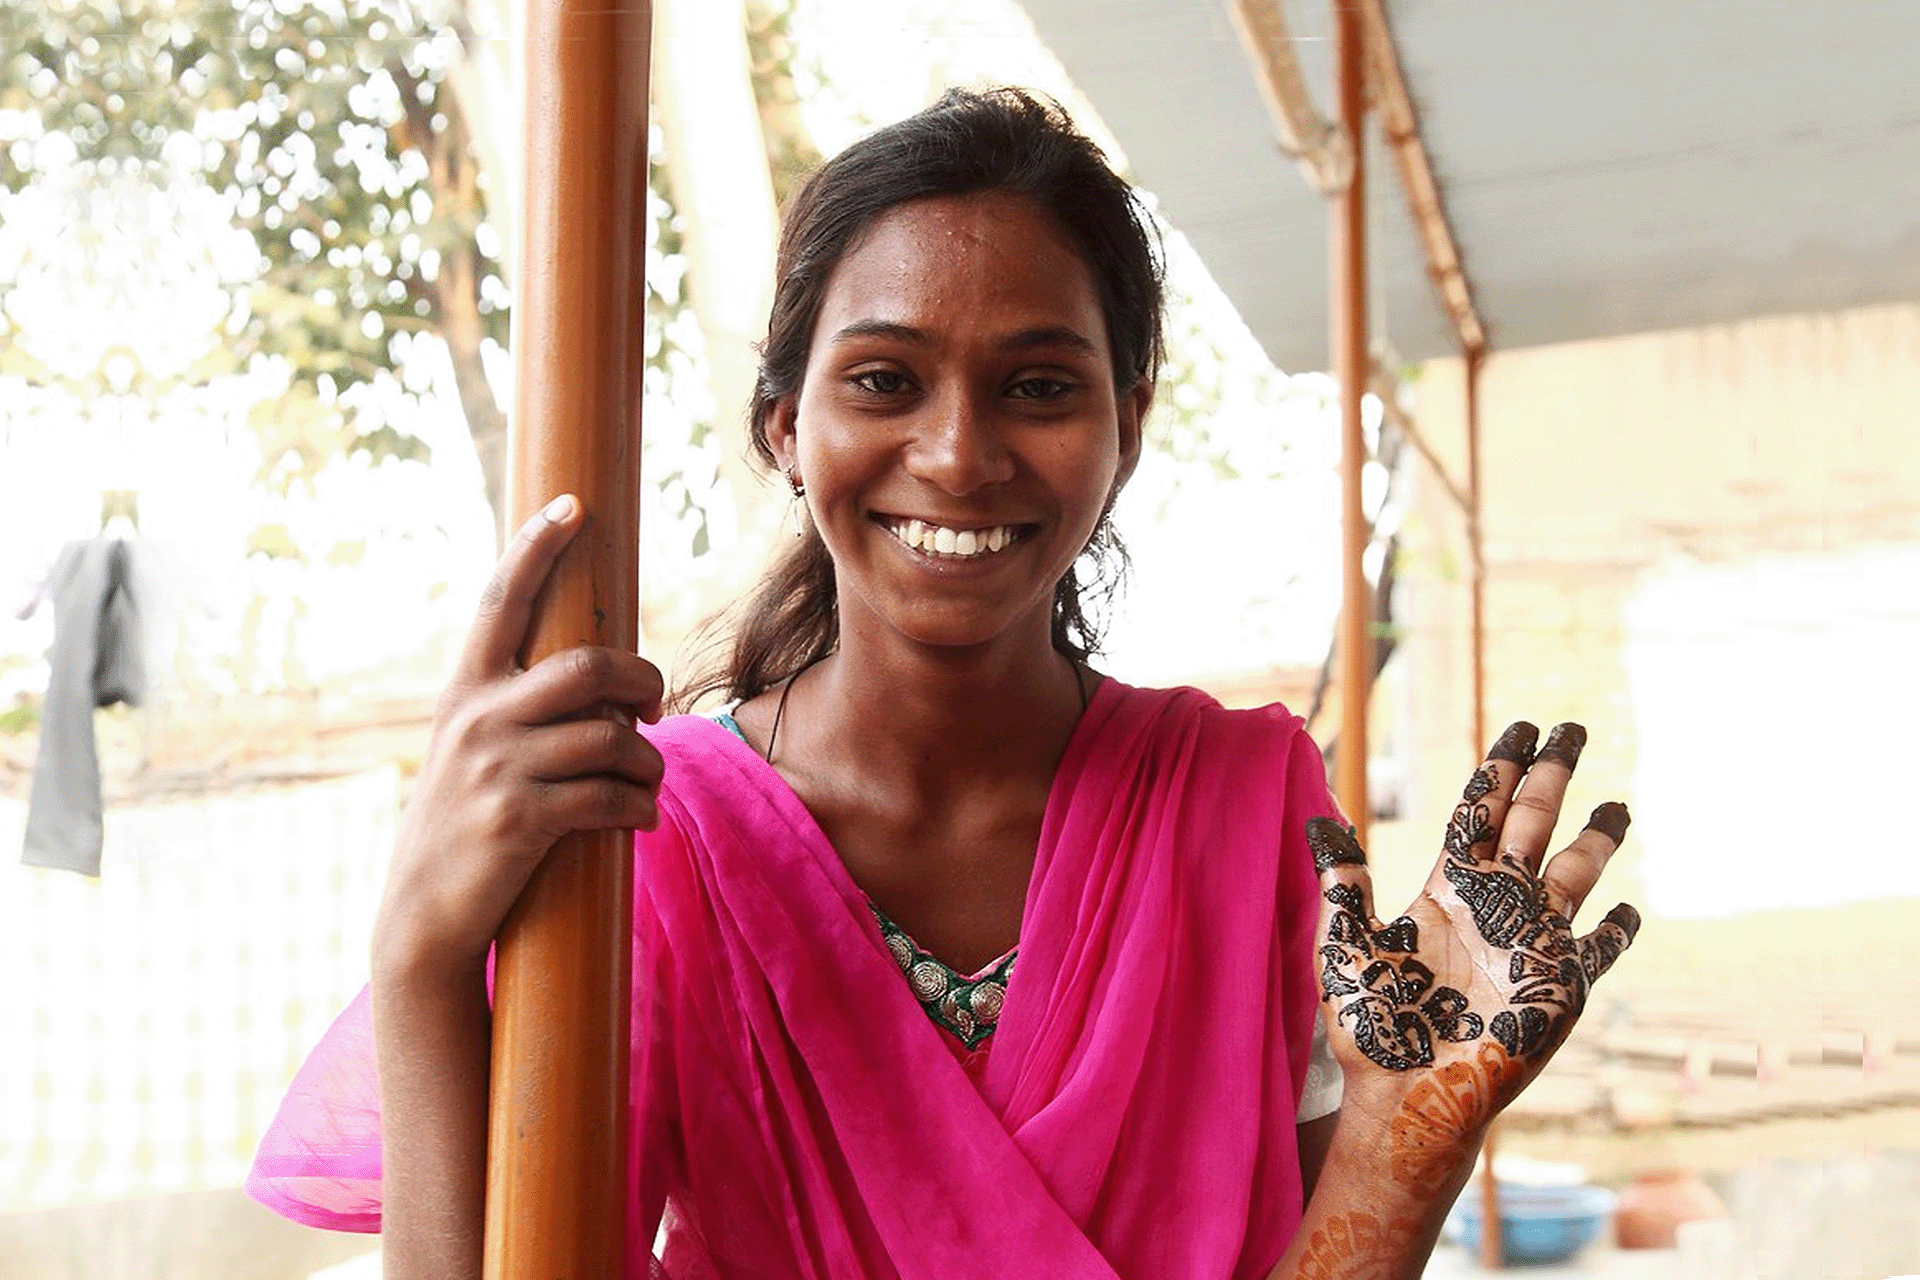 Eradicate the stigma associated with leprosy and to promote the dignity of people affected by the disease.